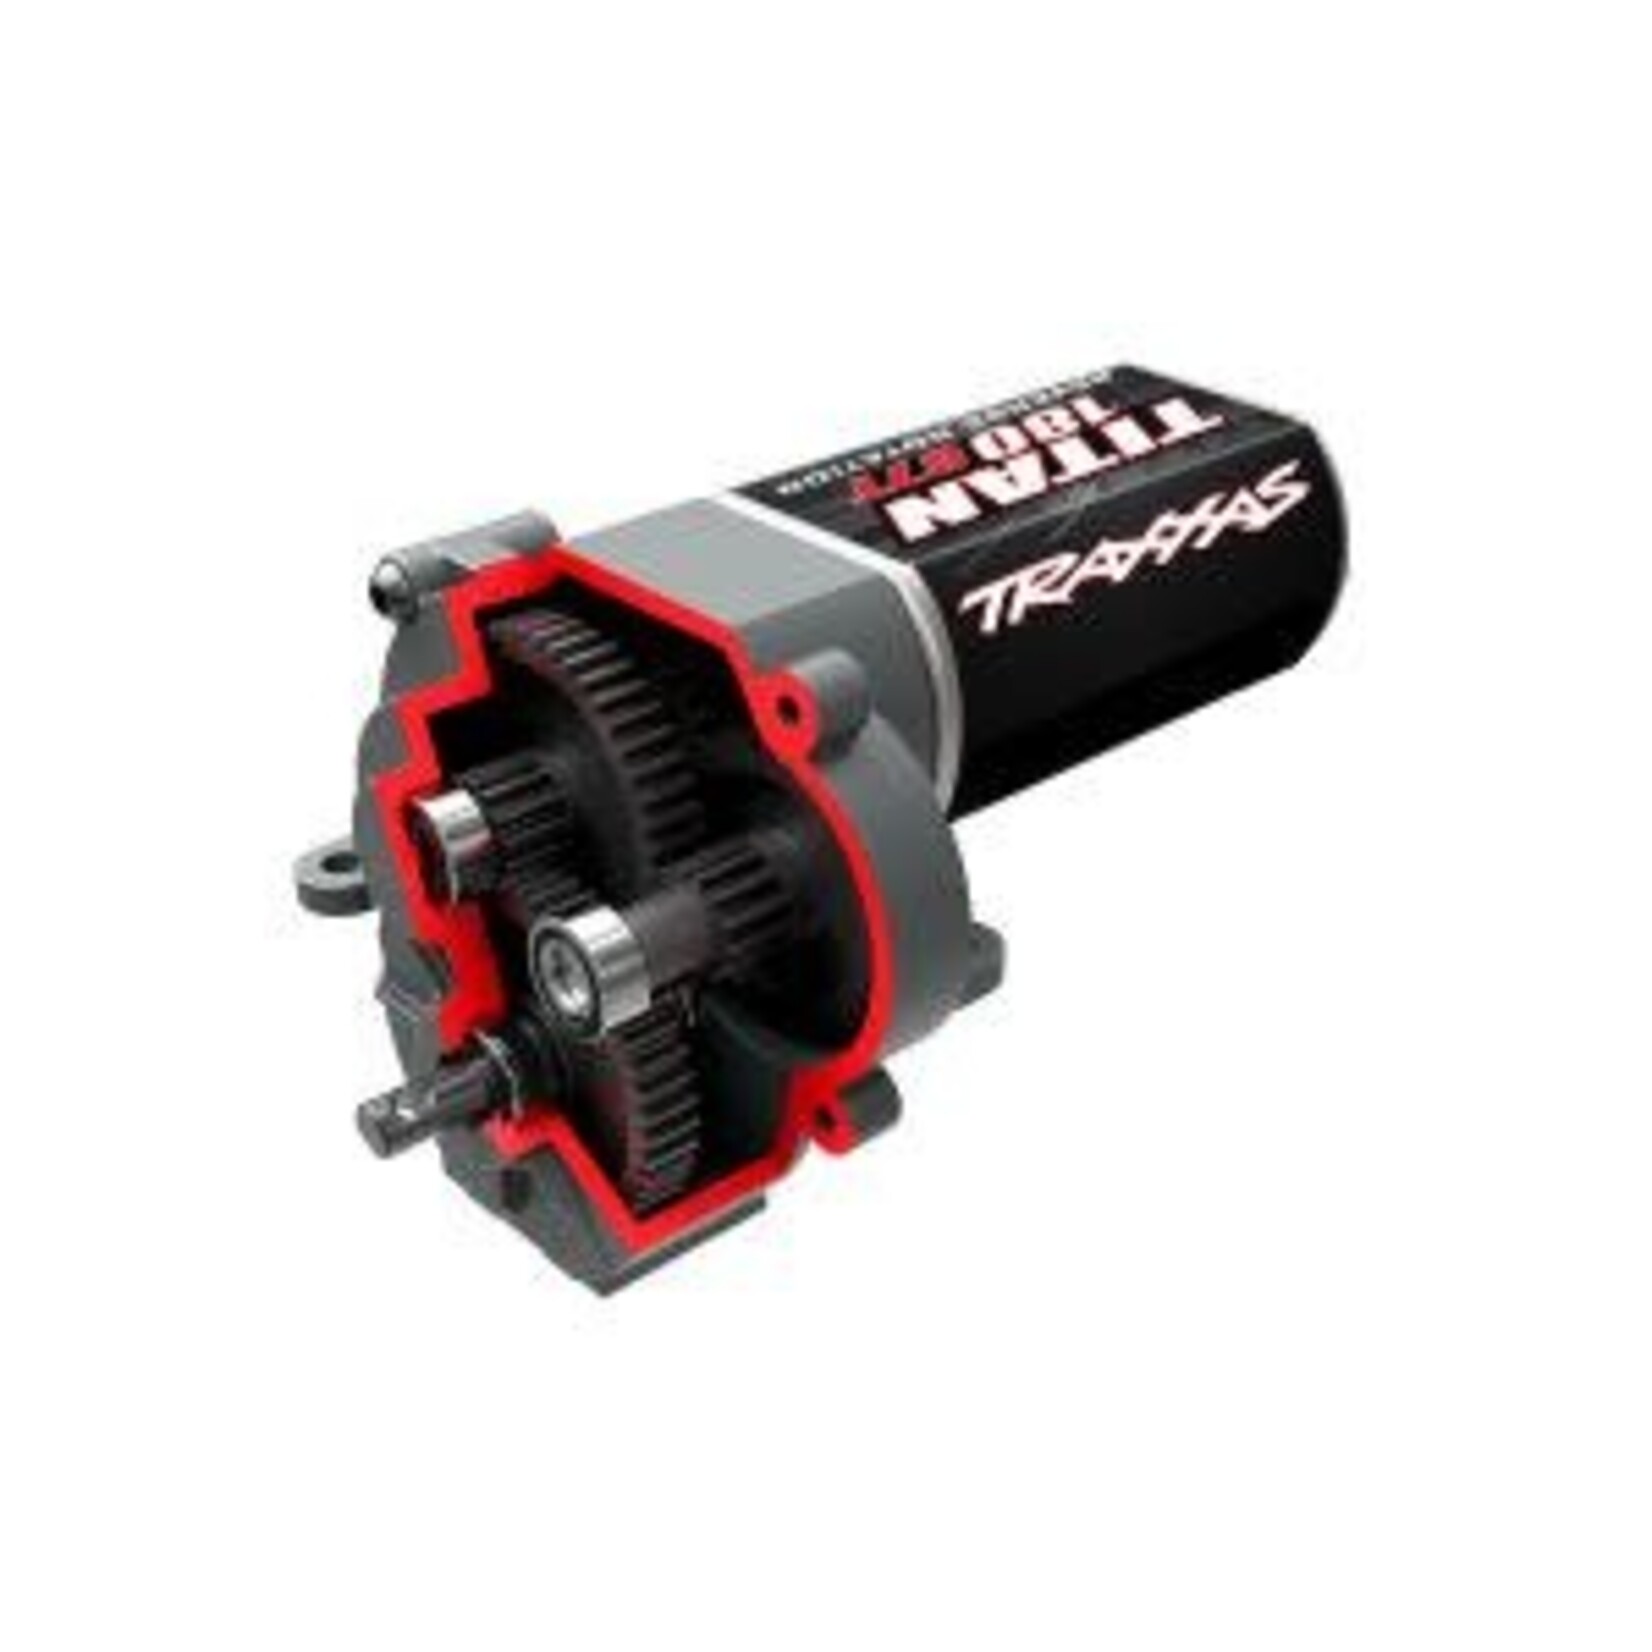 Traxxas 9791  Transmission, complete (high range (trail) gearing) (16.6:1 reduction ratio) (includes Titan® 87T motor)